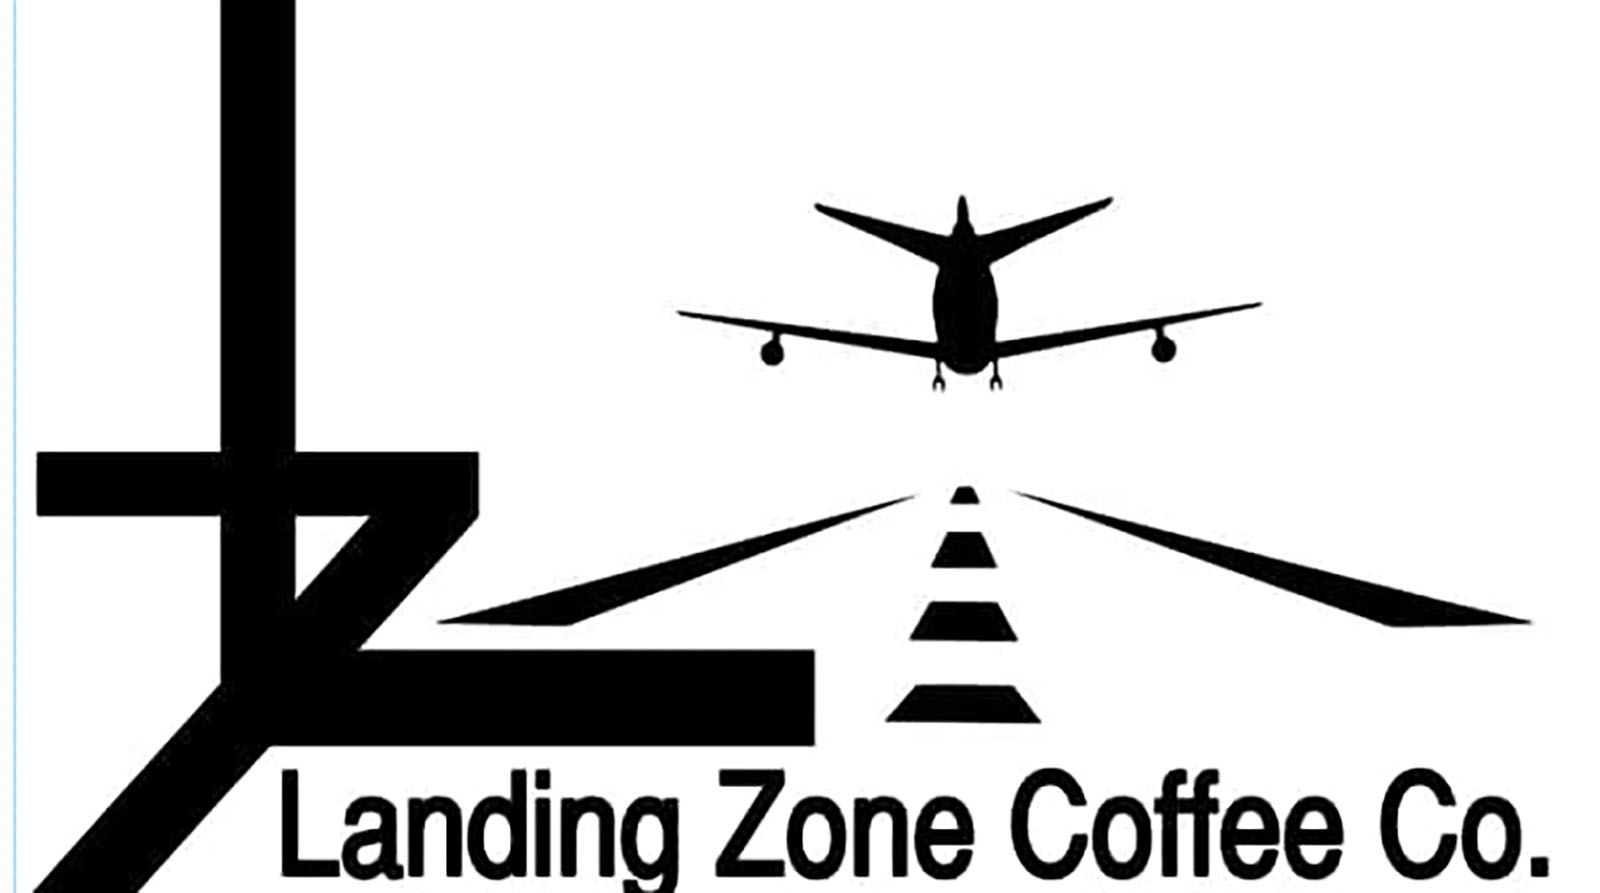 Landing Zone Coffee Co. will reopen on Oct. 6.